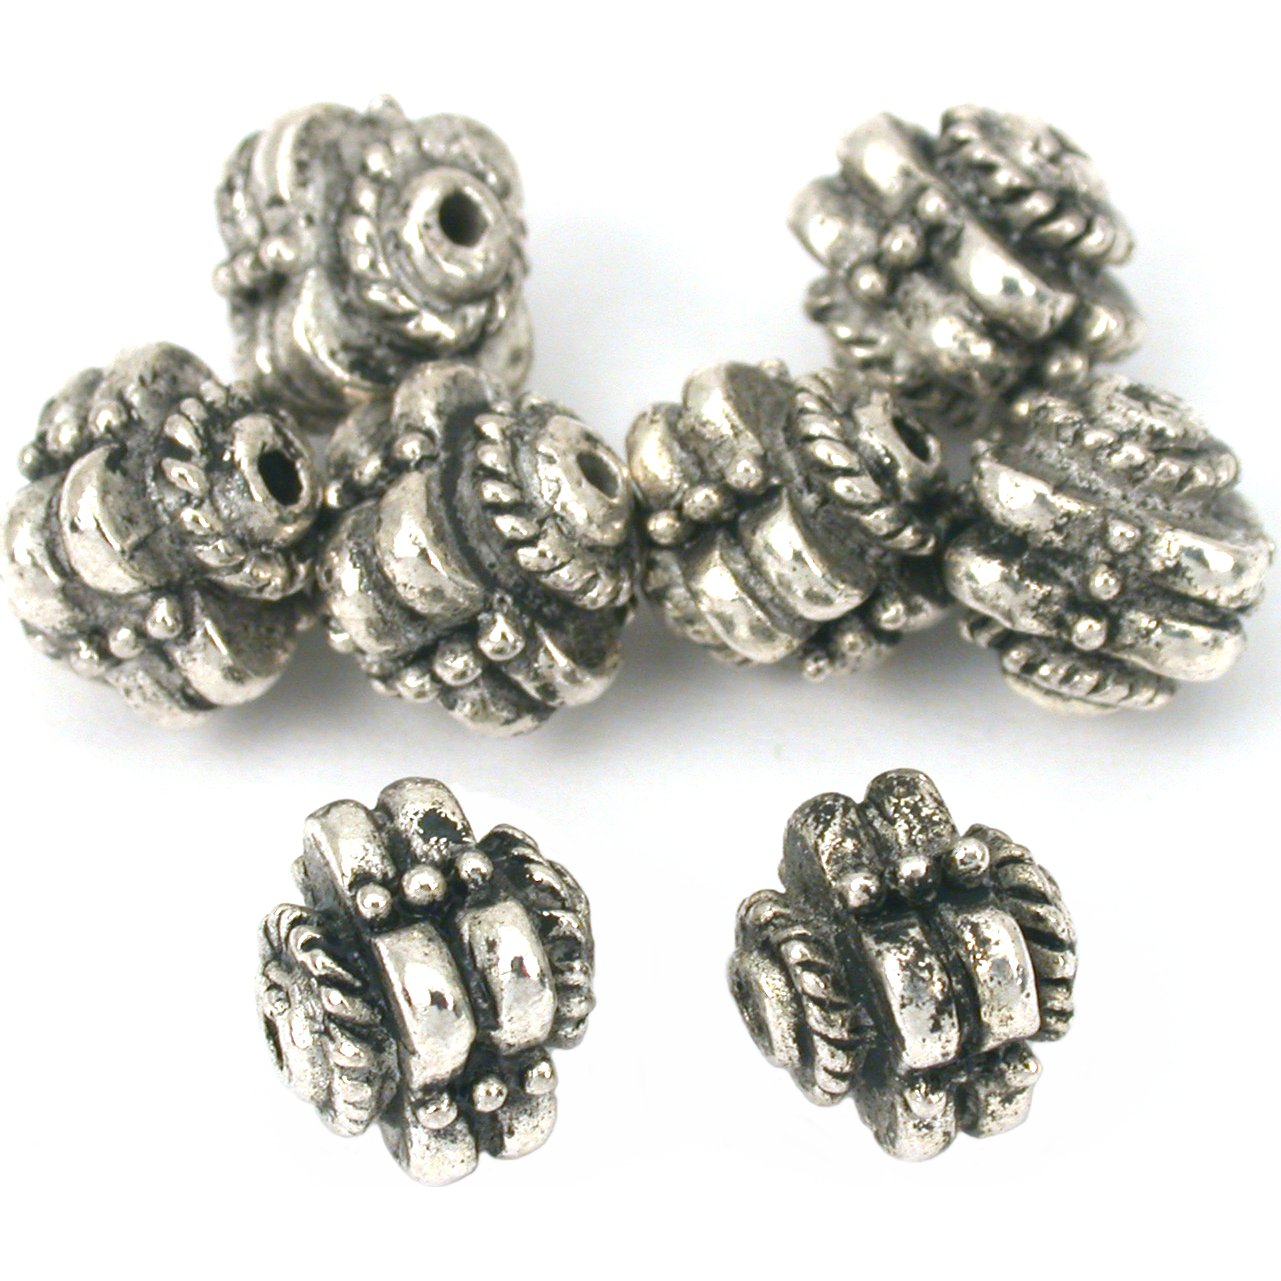 Bali Flower Beads Antique Silver Plated 9mm 8Pcs Approx.